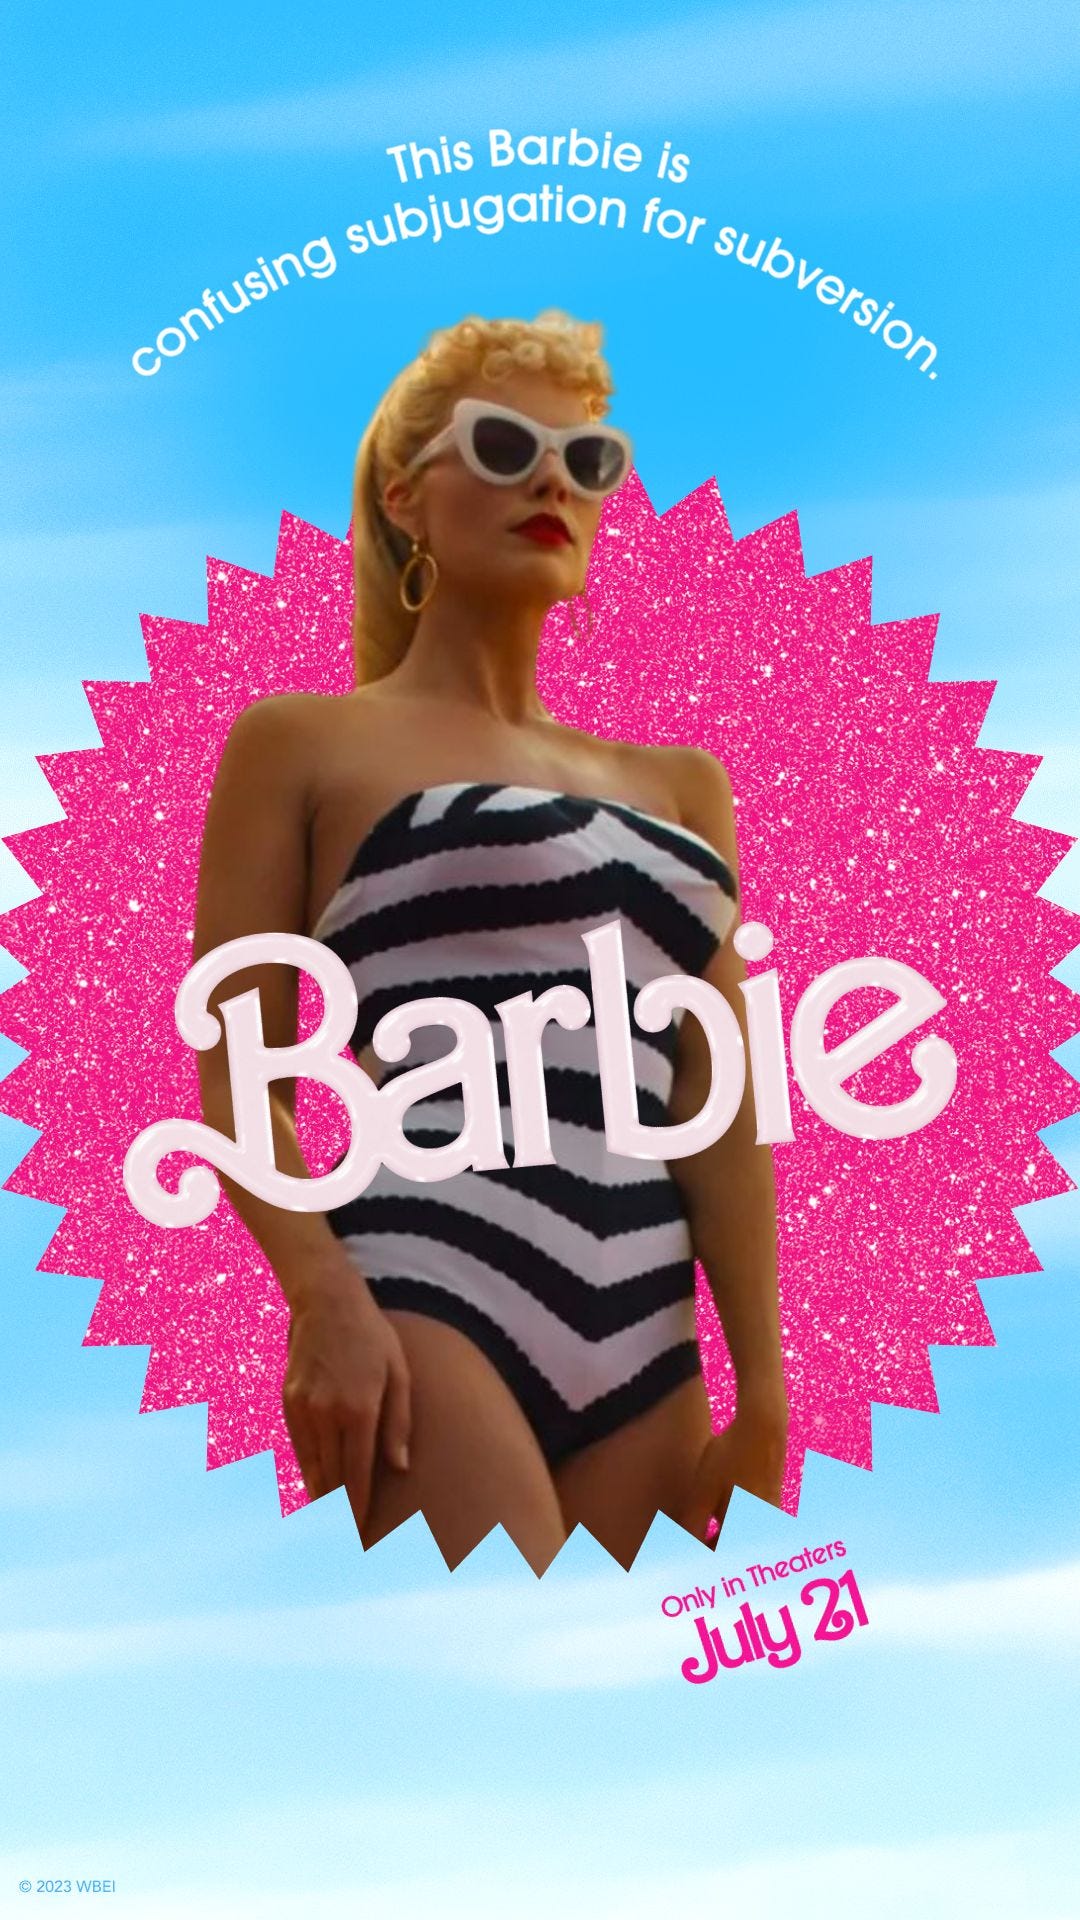 With 33 new looks, Barbie is finally embracing different standards of  beauty - Vox